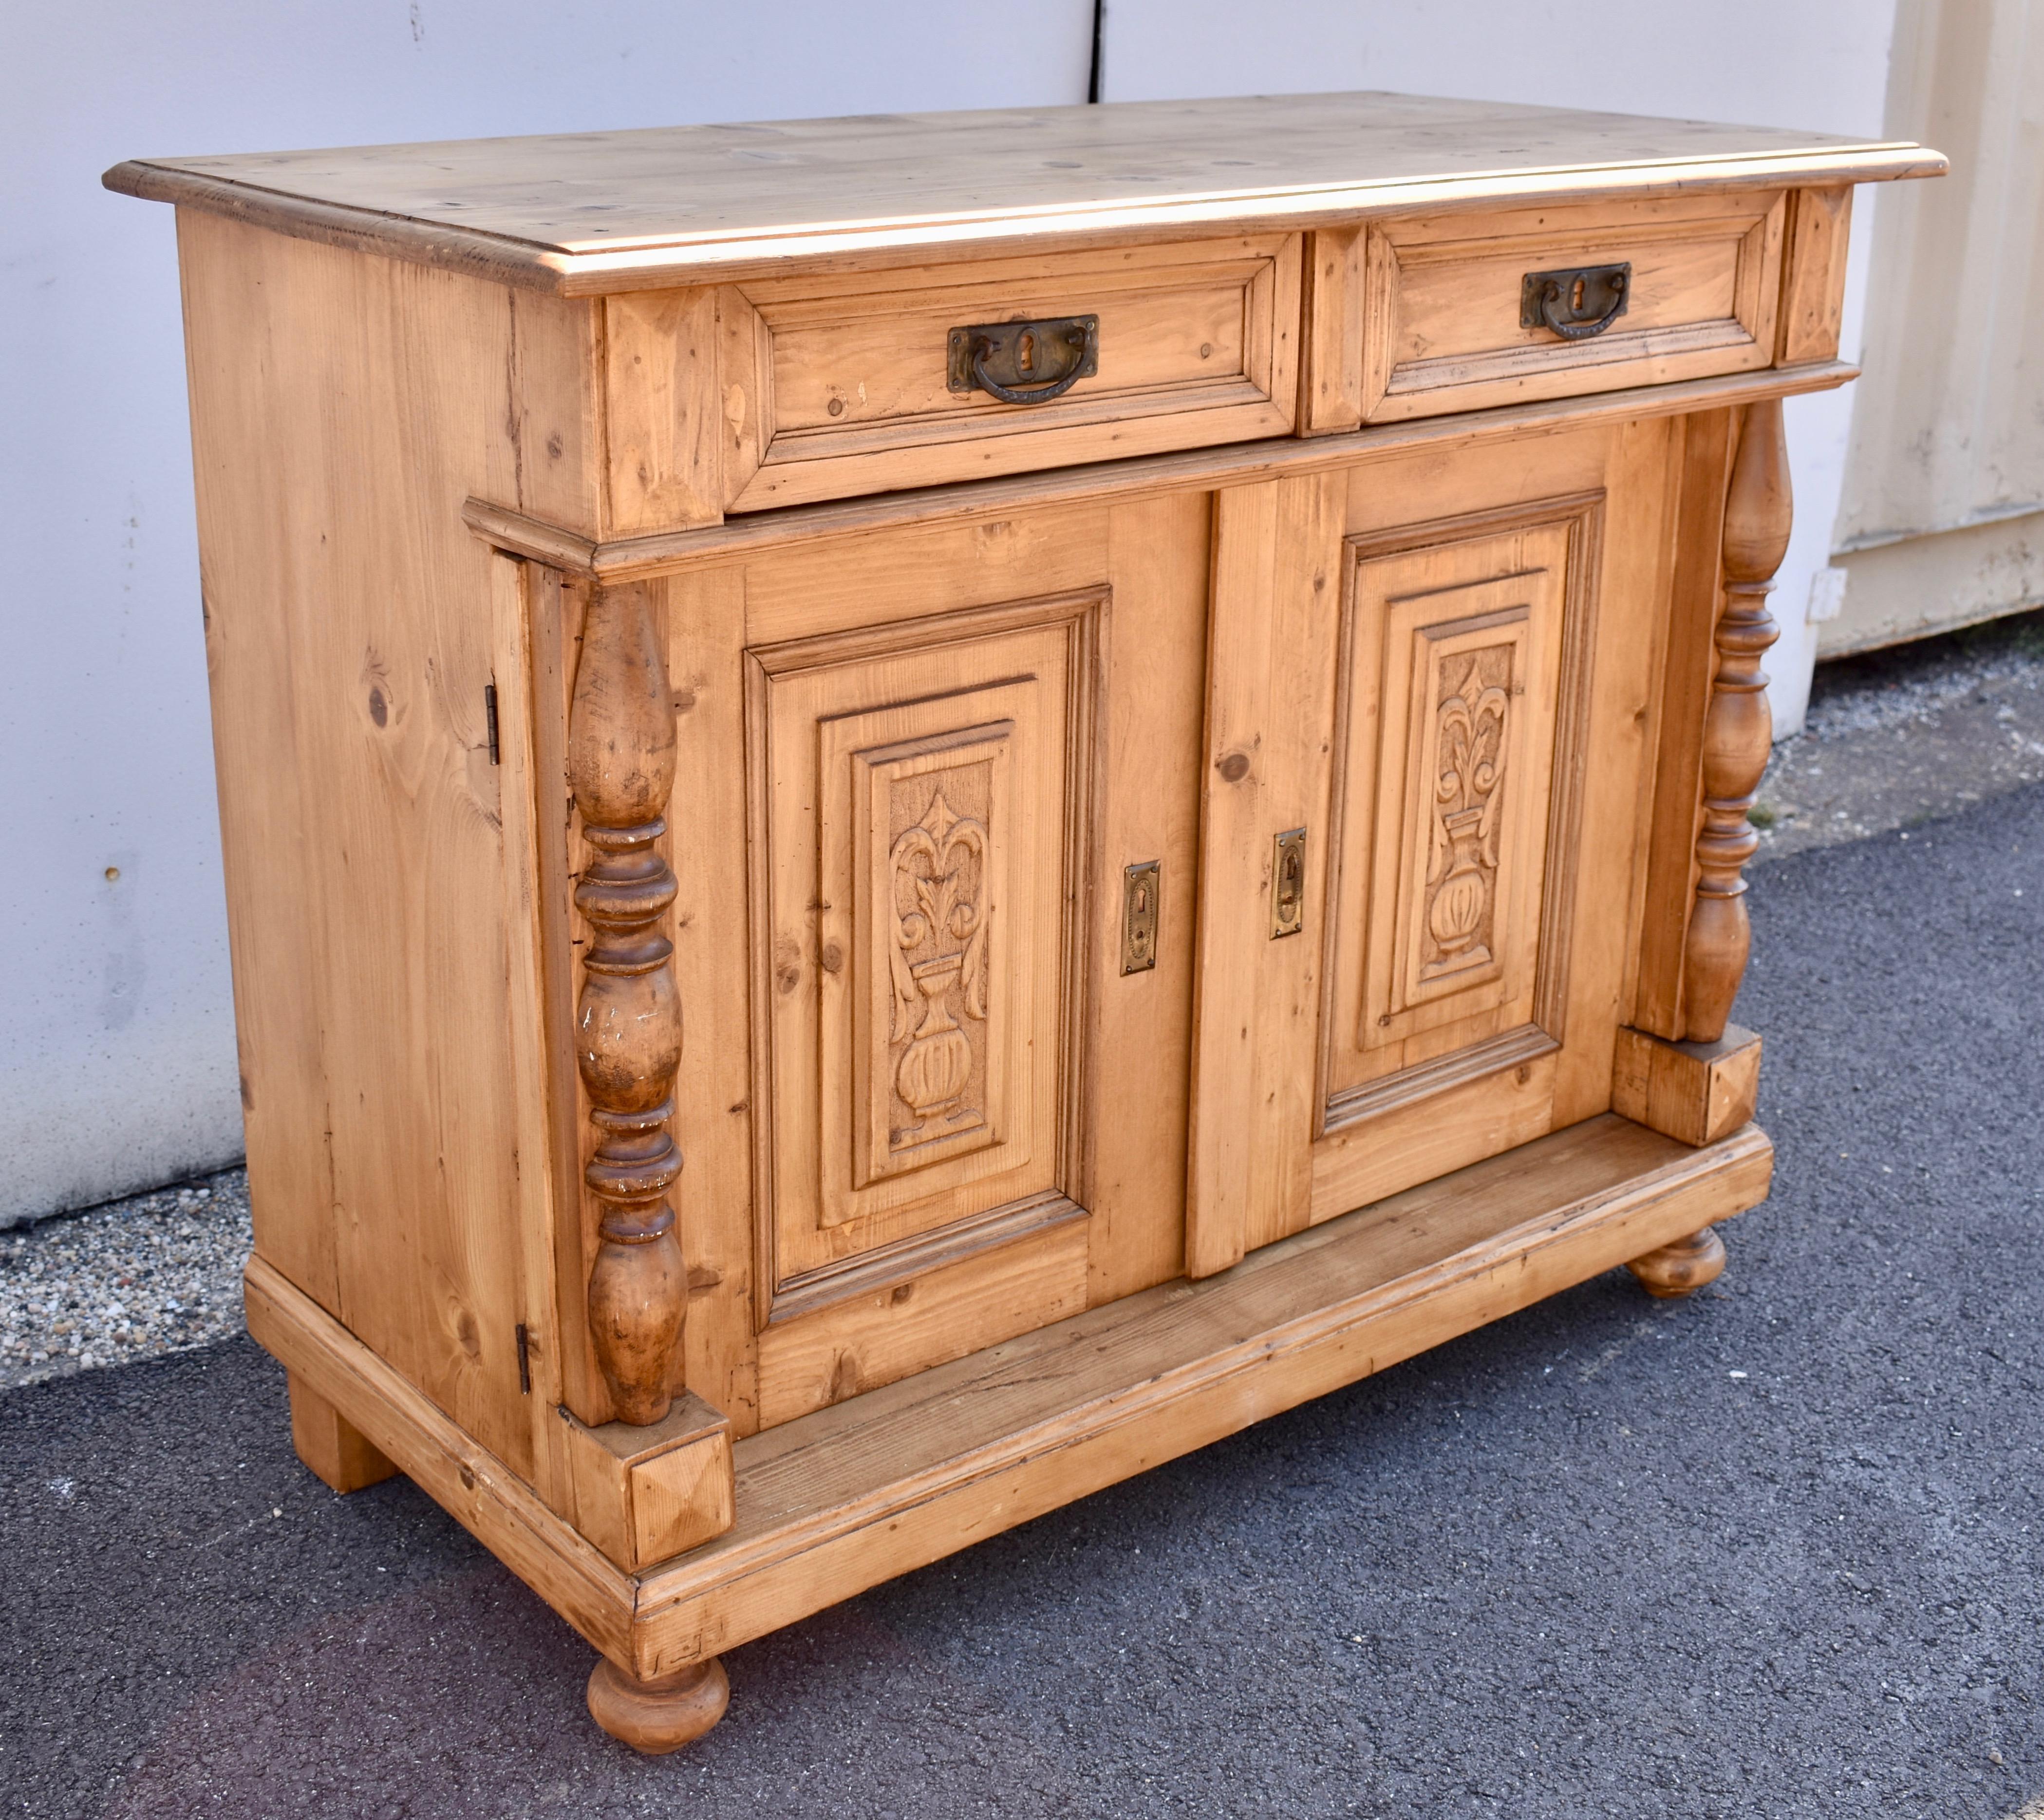 This handsome dresser base has a step-down edge to the top over two dovetailed drawers which stand proud of the front of the piece.  Two doors have raised panels featuring stylized carved urns bearing flowers.  These are flanked by hardwood split